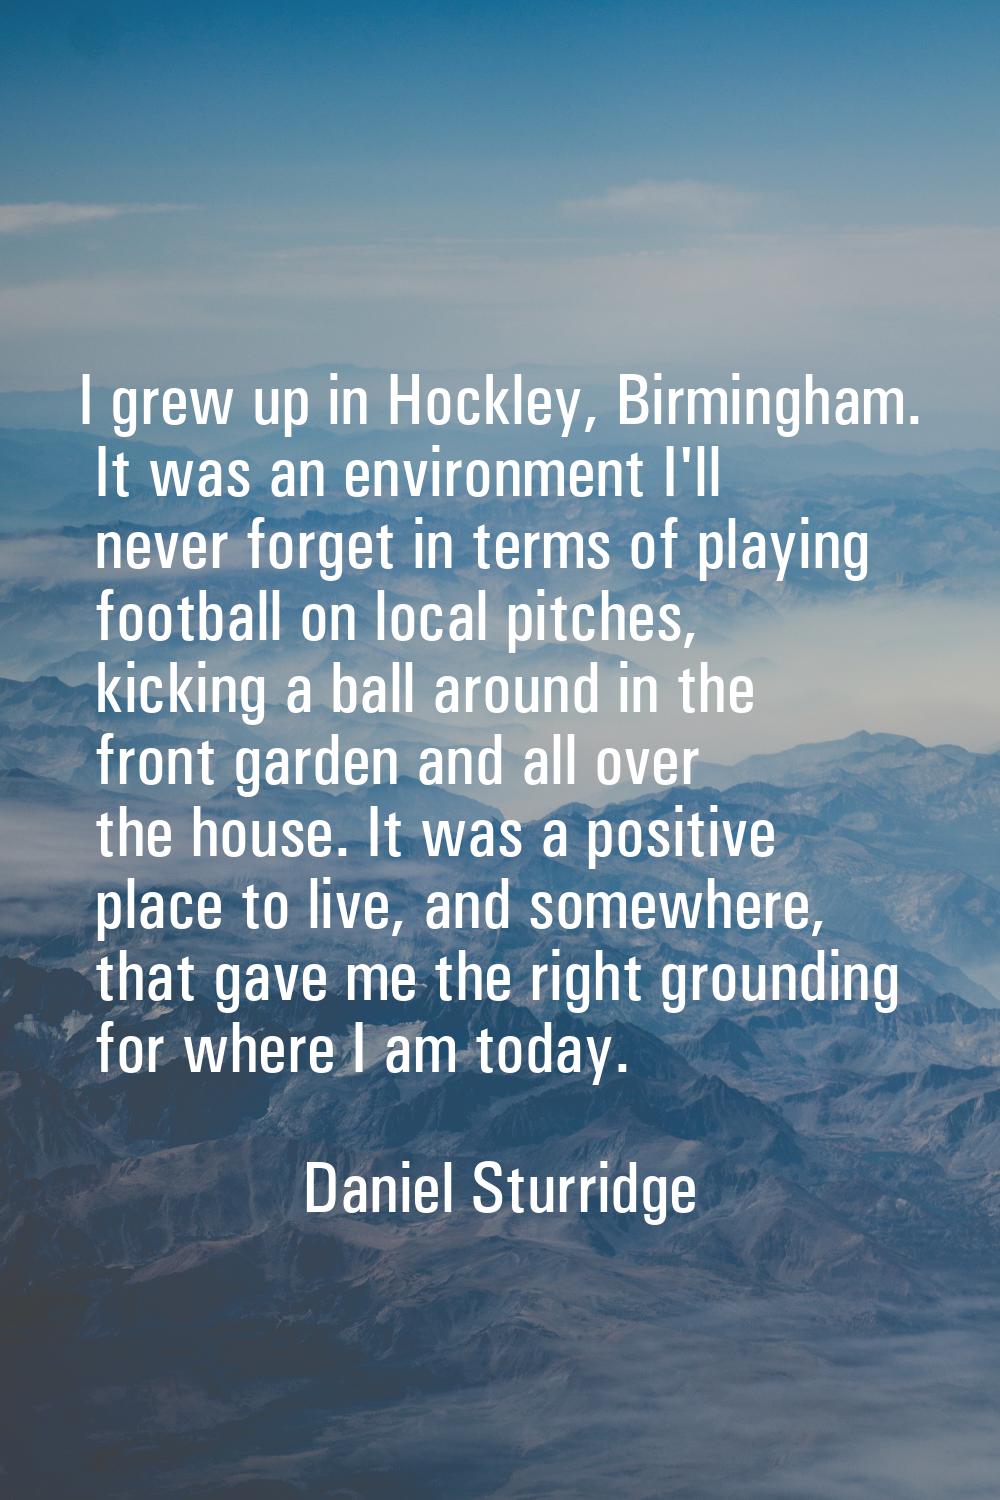 I grew up in Hockley, Birmingham. It was an environment I'll never forget in terms of playing footb